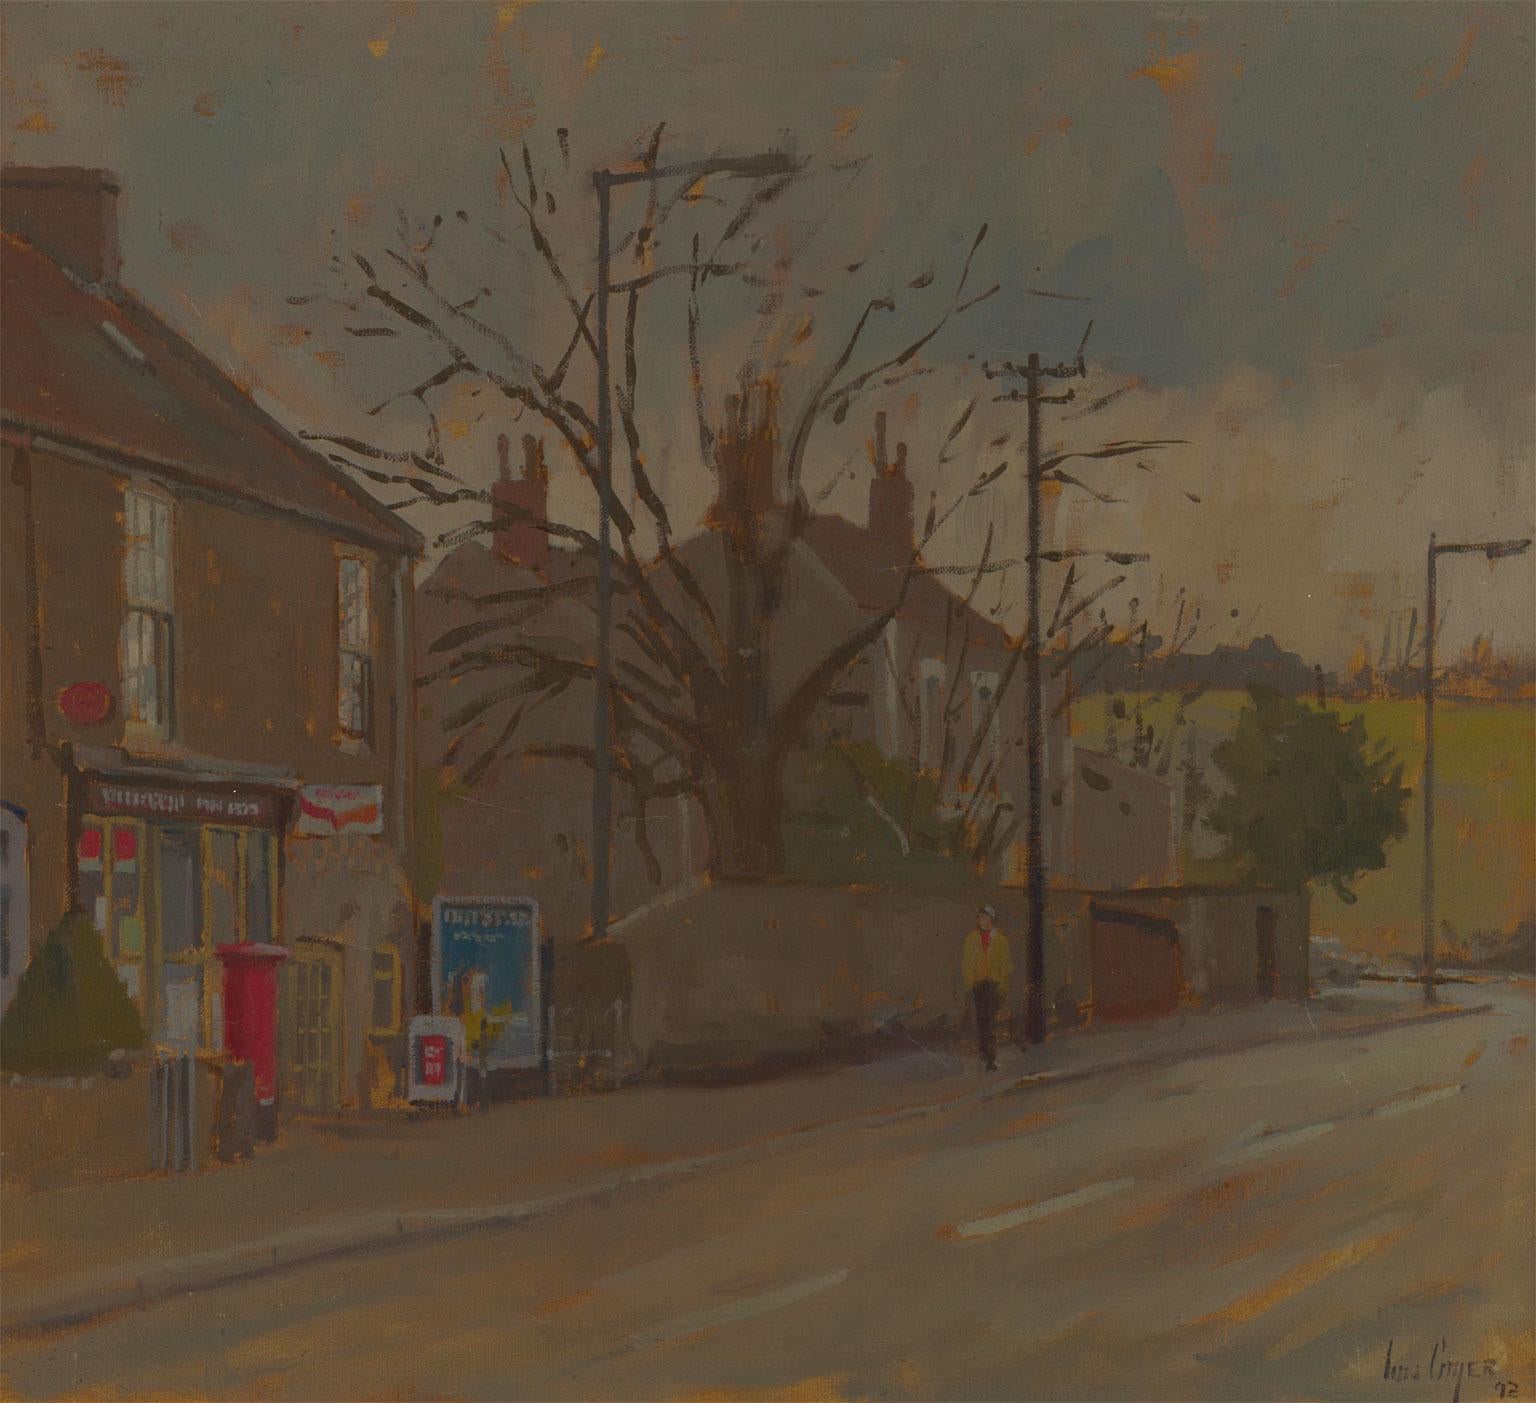 An impressive oil painting by prolific British artist Ian Cryer, depicting the post office in Willsbridge, Bristol. Based in the West Country Cryer is best known for his landscapes, interiors and representations of British rural life.

This